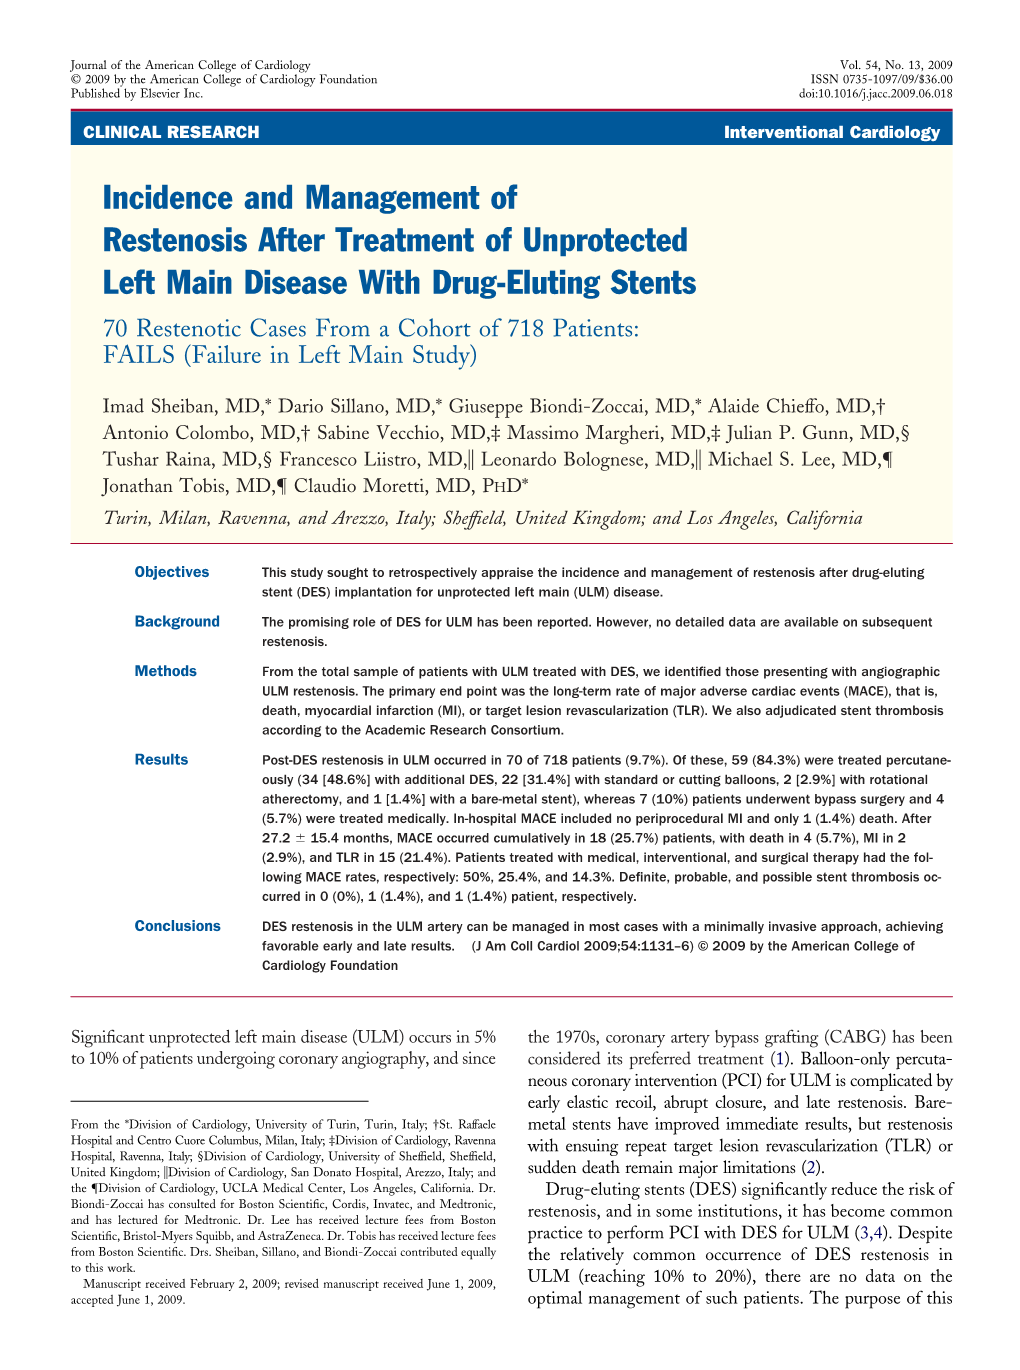 Incidence and Management of Restenosis After Treatment Of